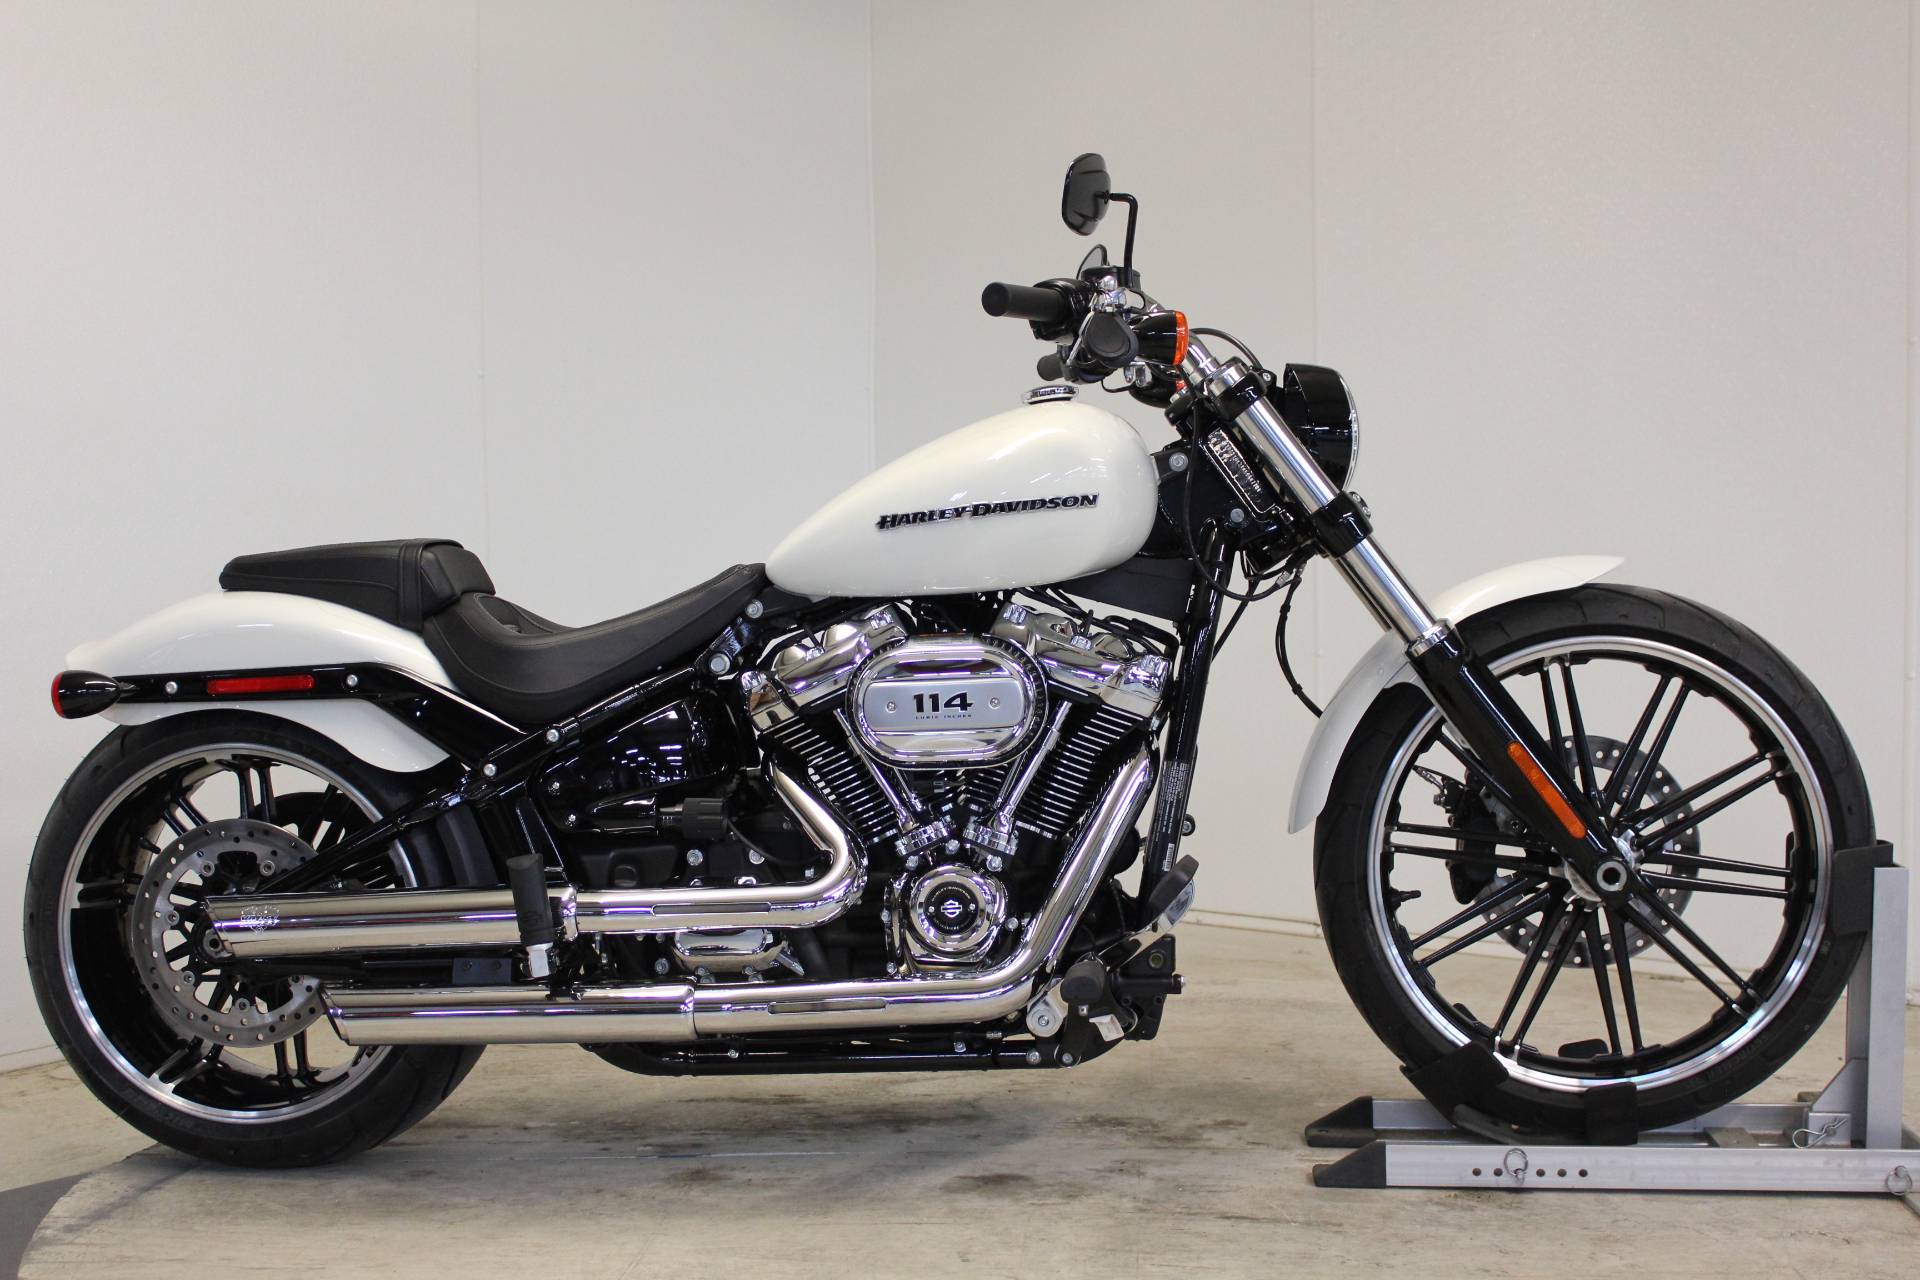 Used 2019 Harley Davidson Breakout 114 Motorcycles In Adams Ma Stock Number 064770